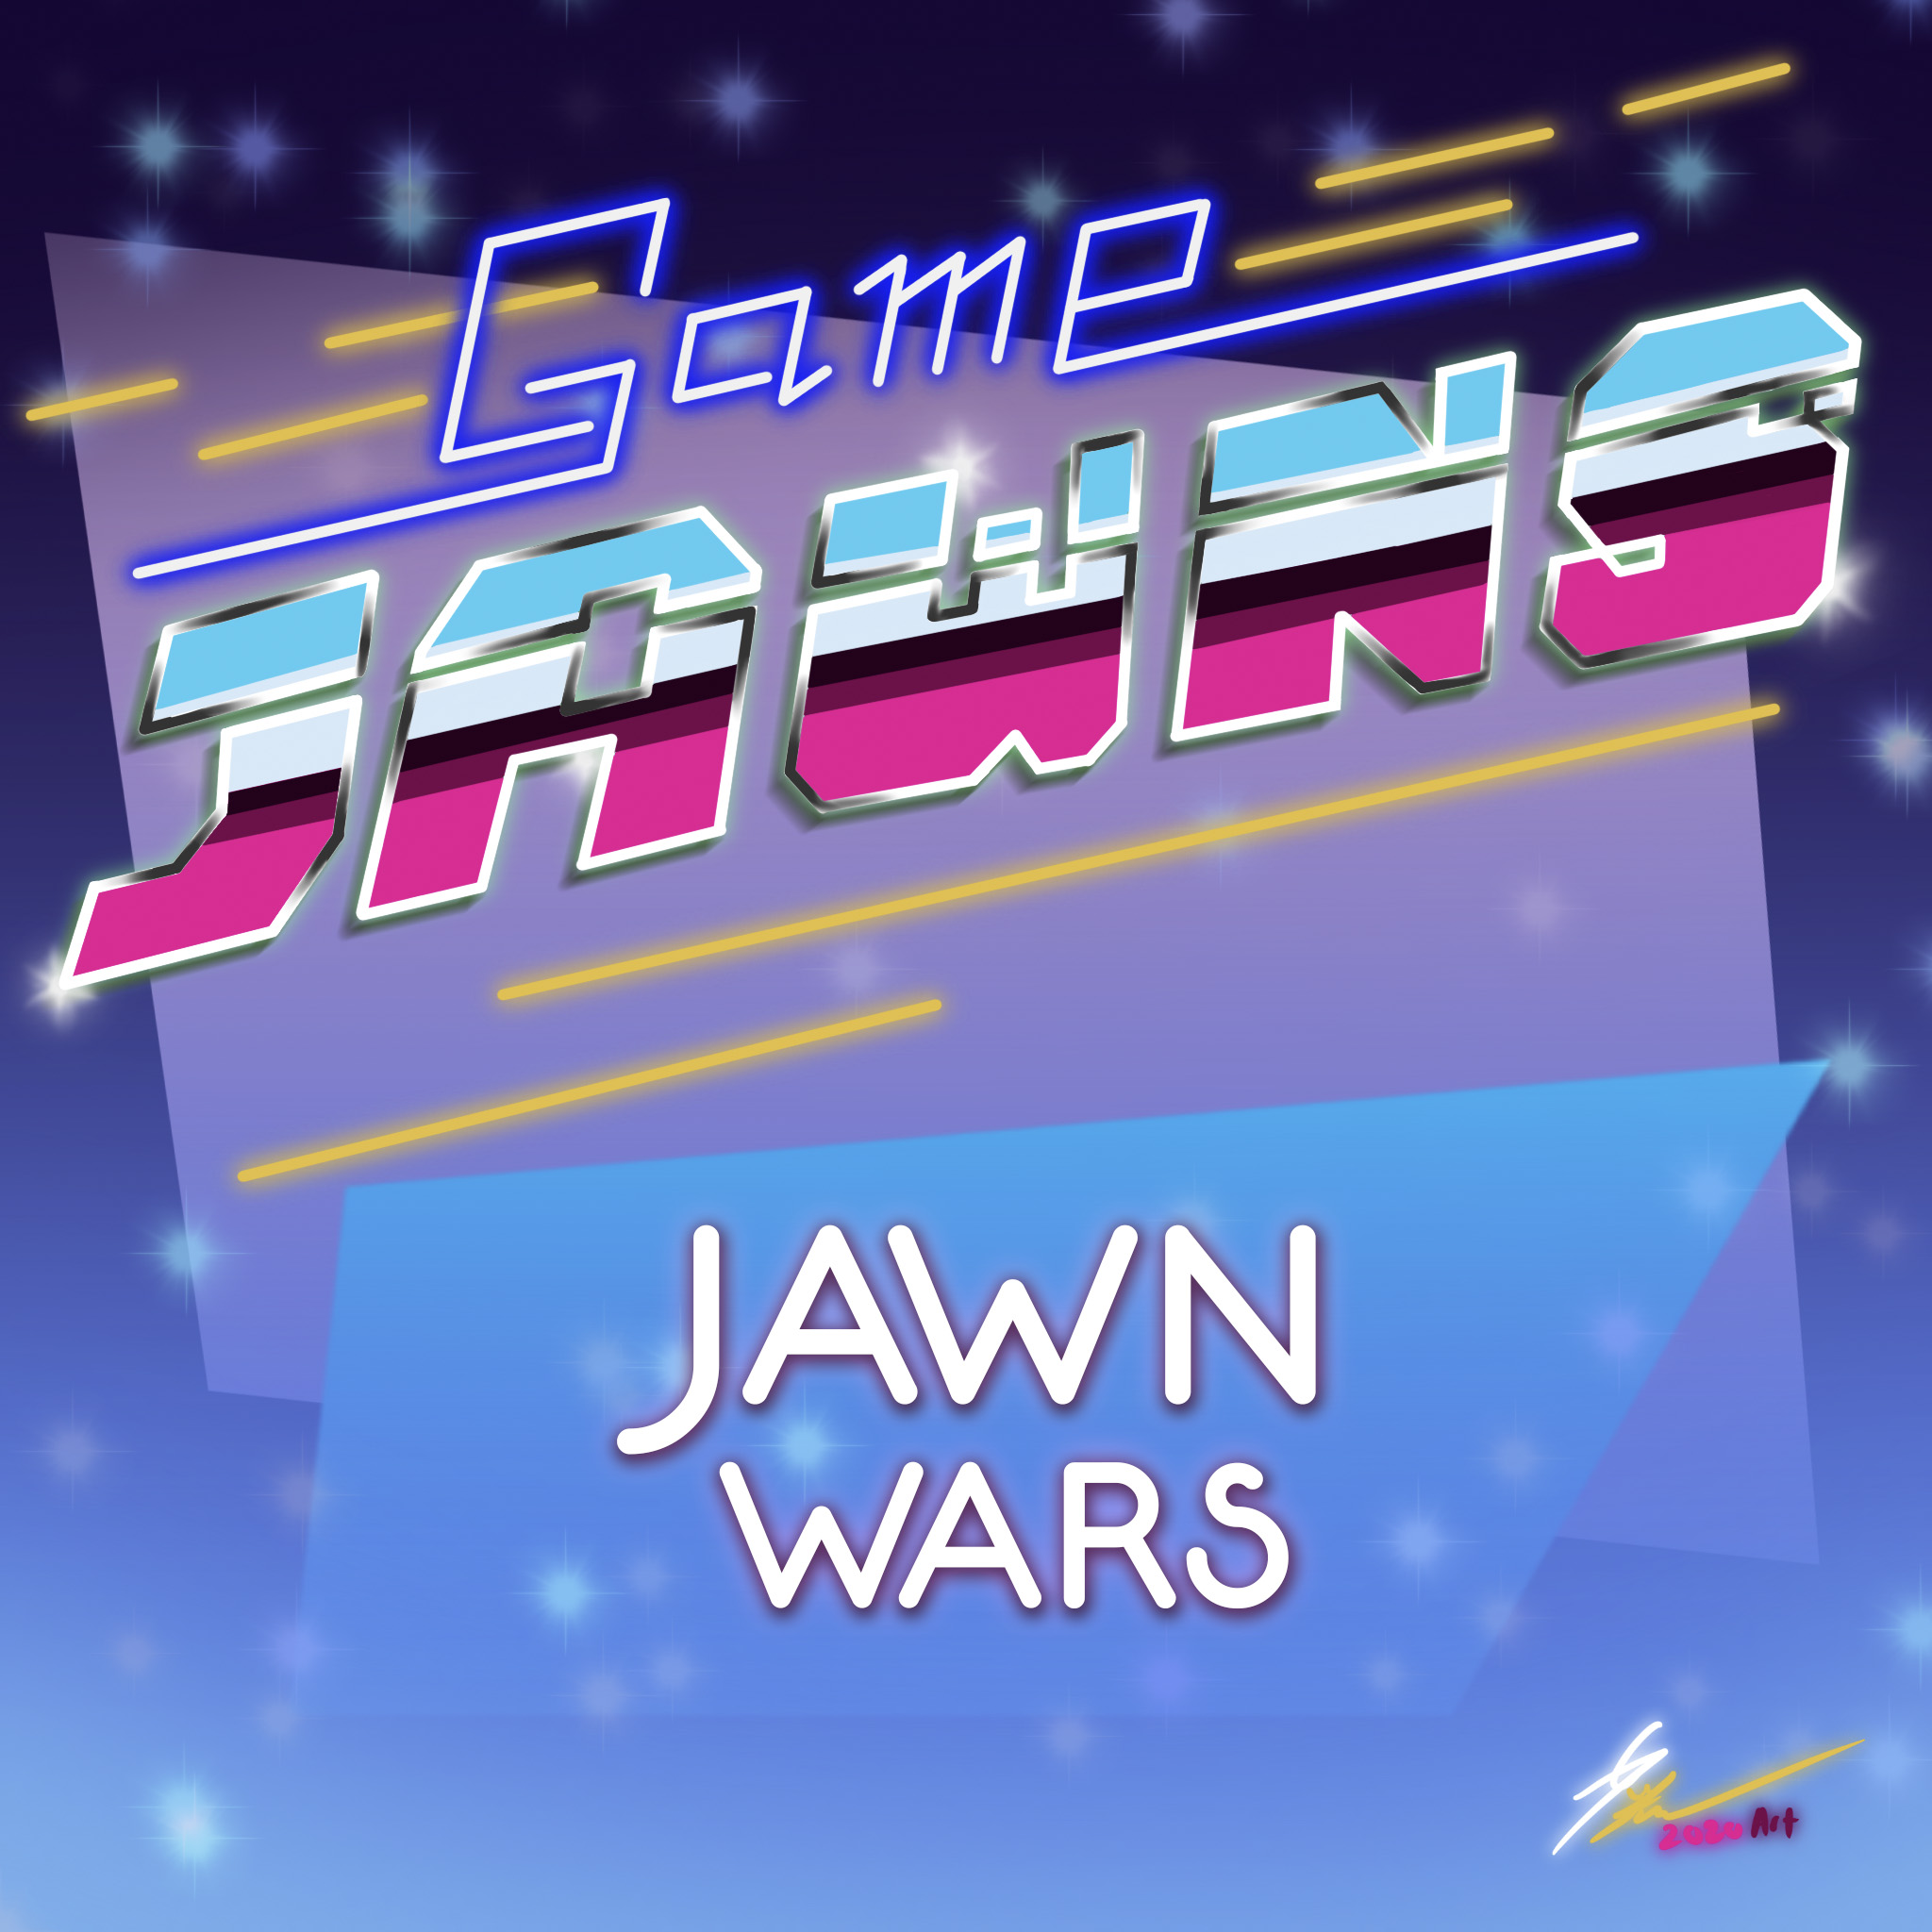 Artwork for podcast Game Jawns